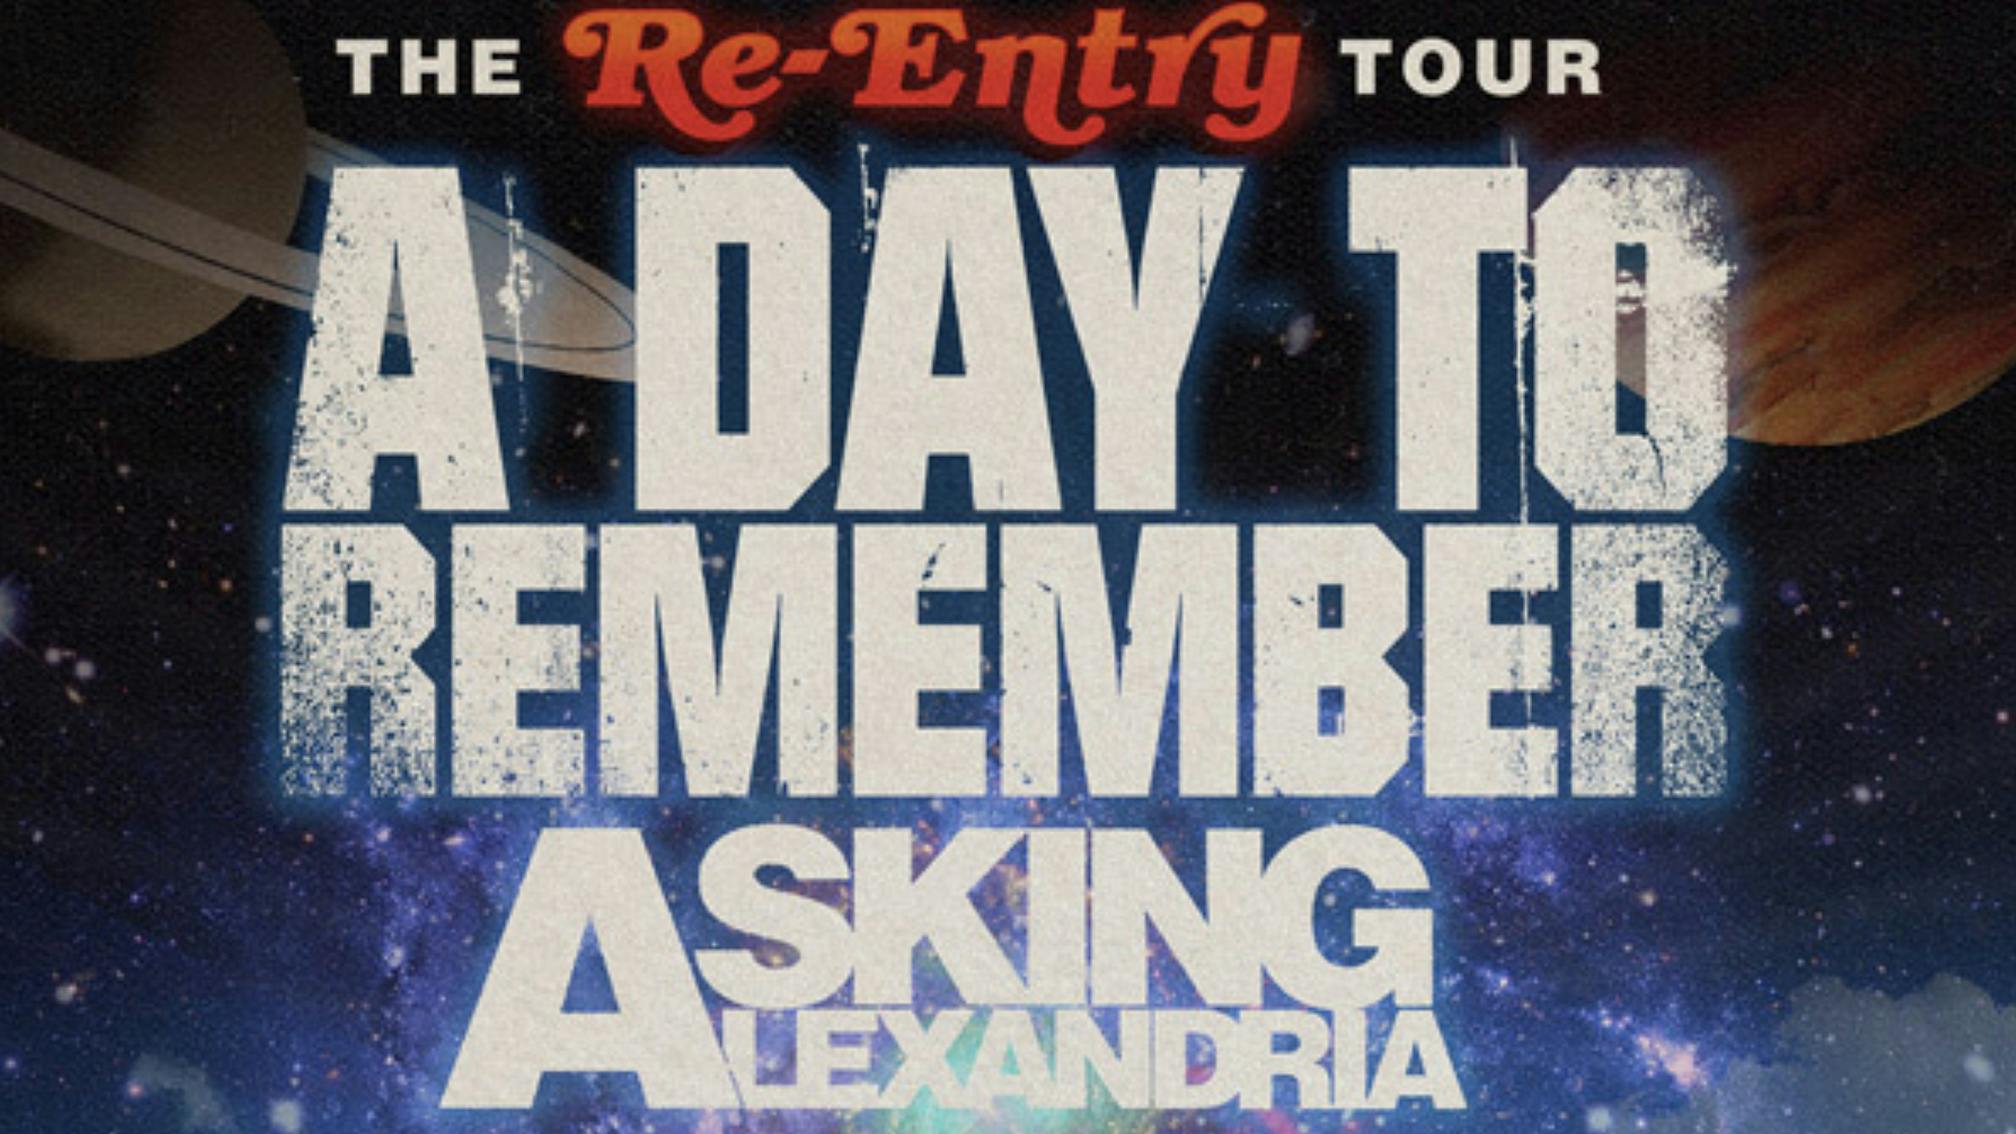 A Day To Remember announce huge U.S. tour with Asking Alexandria